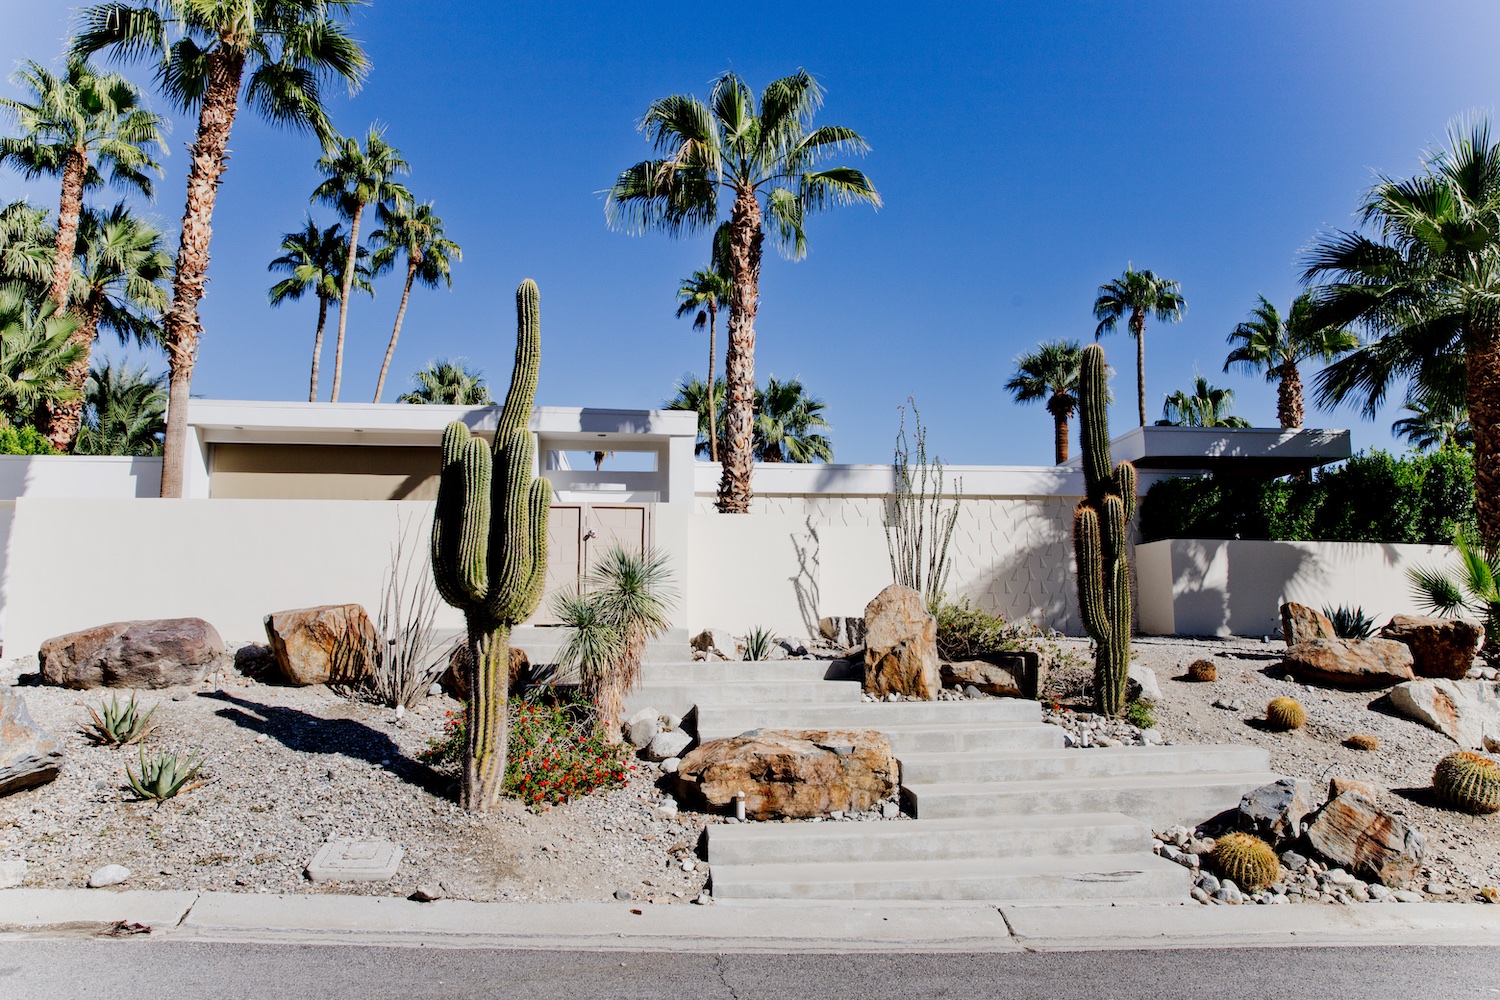 Palm Springs California California 2 days itinerary where to stay art architecture | www.thegoldenbun.com